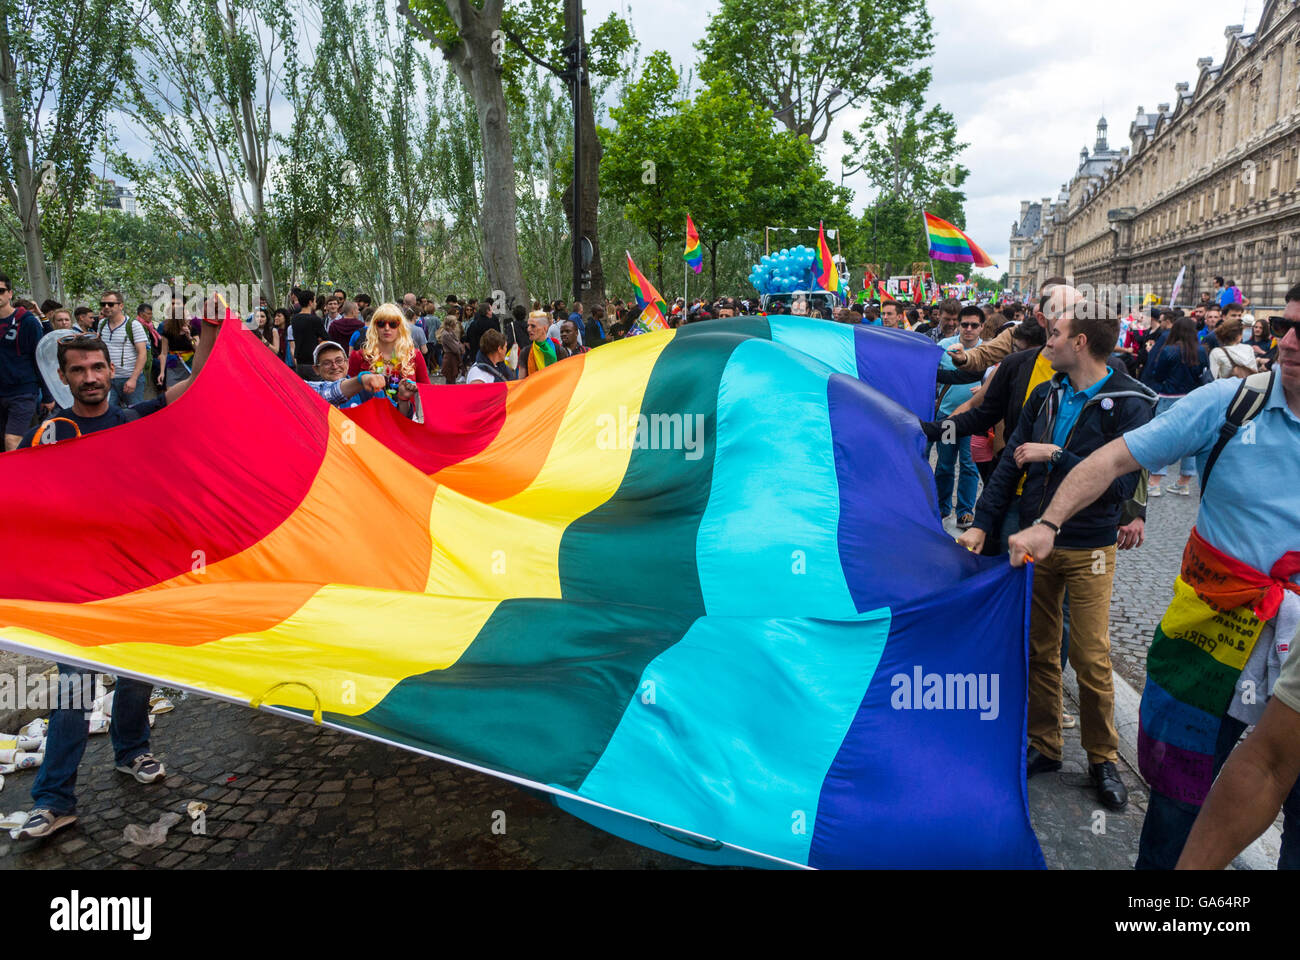 Paris, France, Crowd People Holding Gay Rainbow Flag at Gay Pride, LGBTQ Activism, Marching on Street, Campaign for Homosexual Equality, gay rights activists protesting Stock Photo